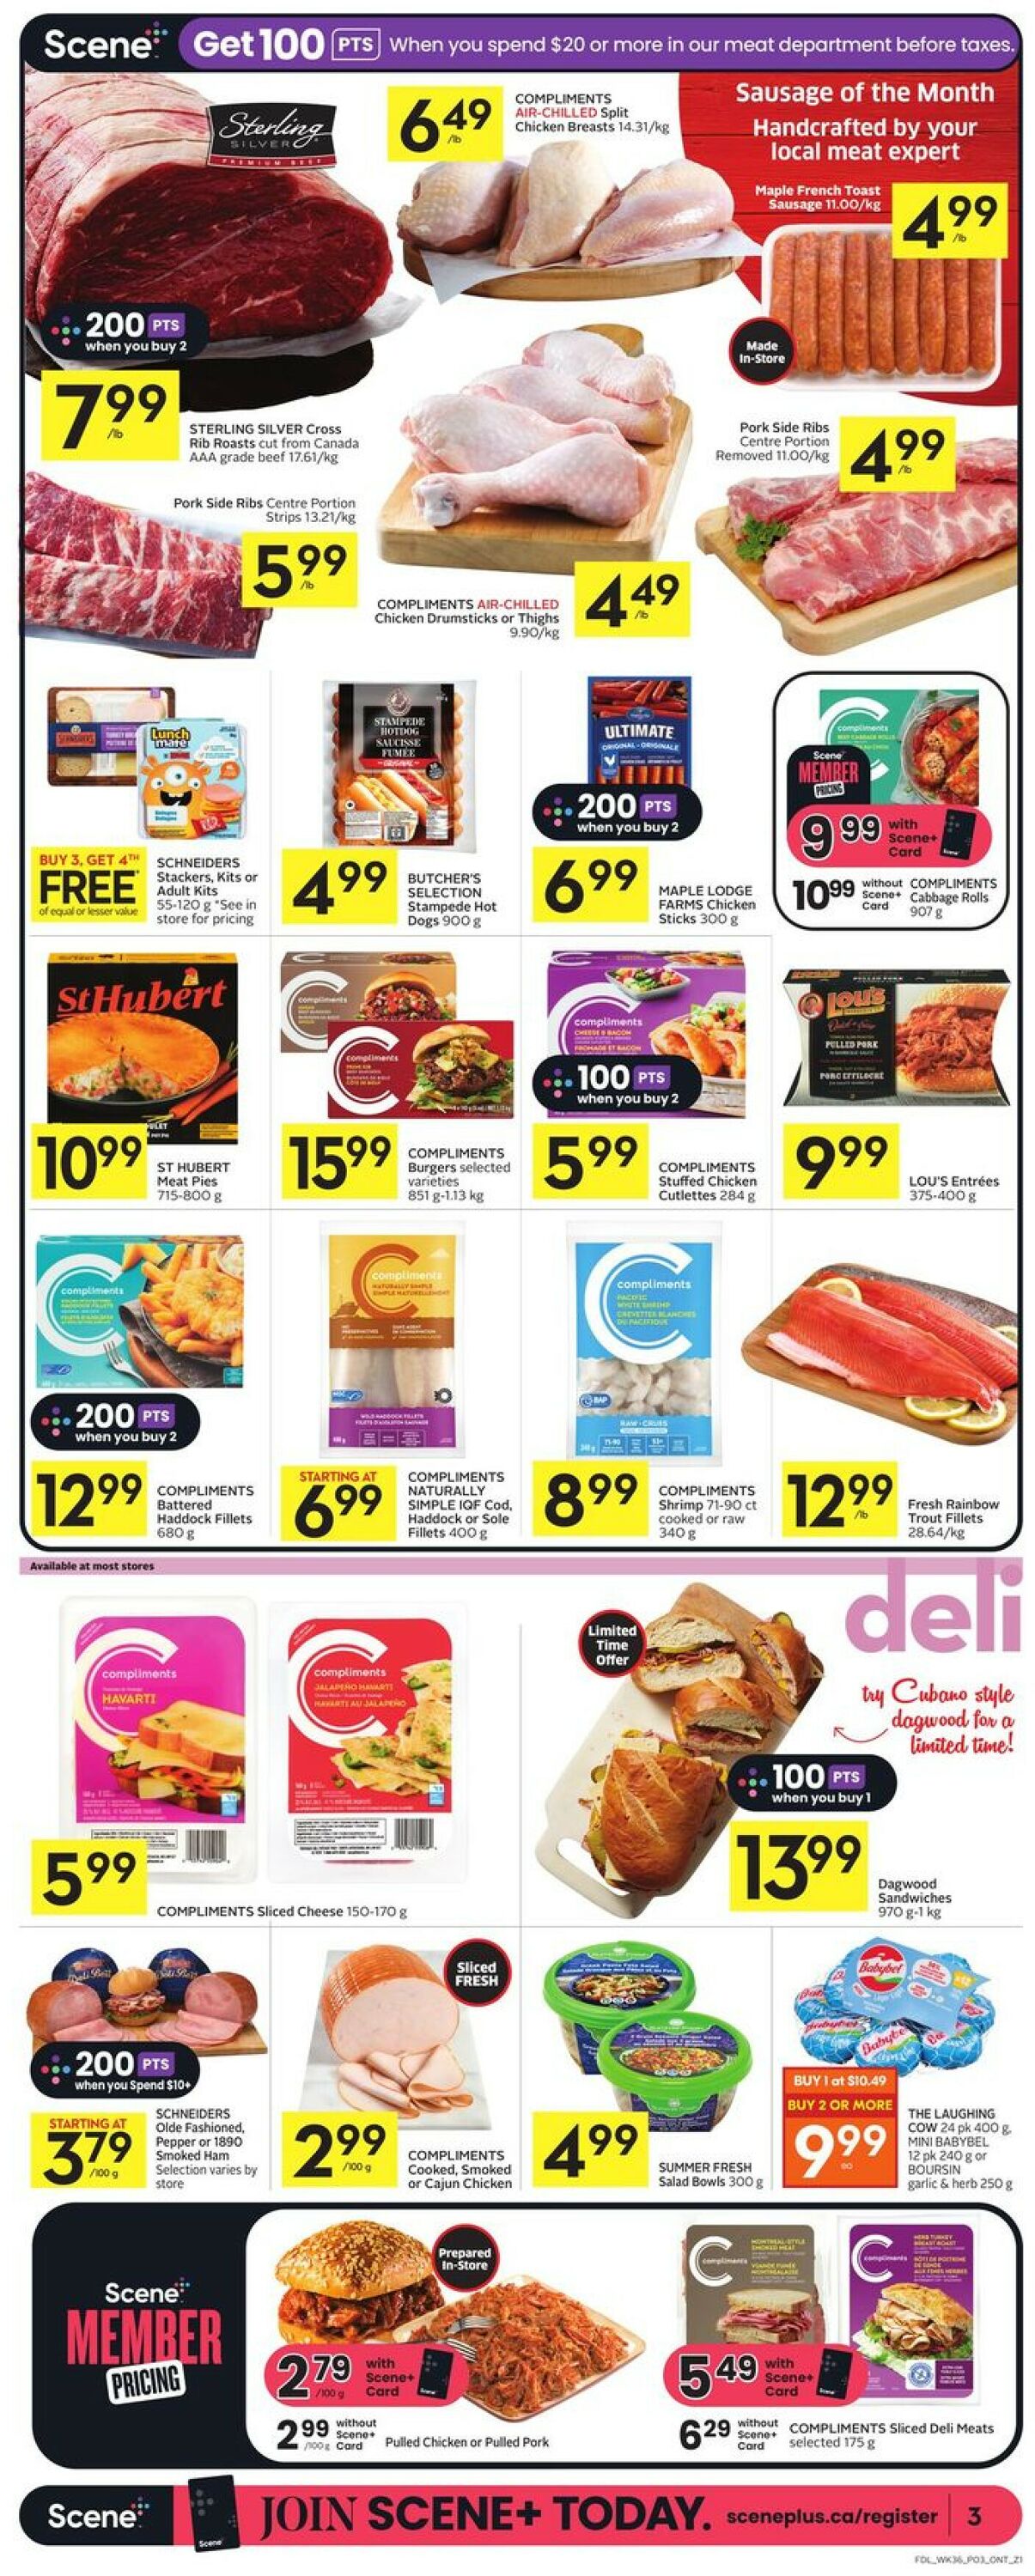 Foodland Flyer from 01/05/2023